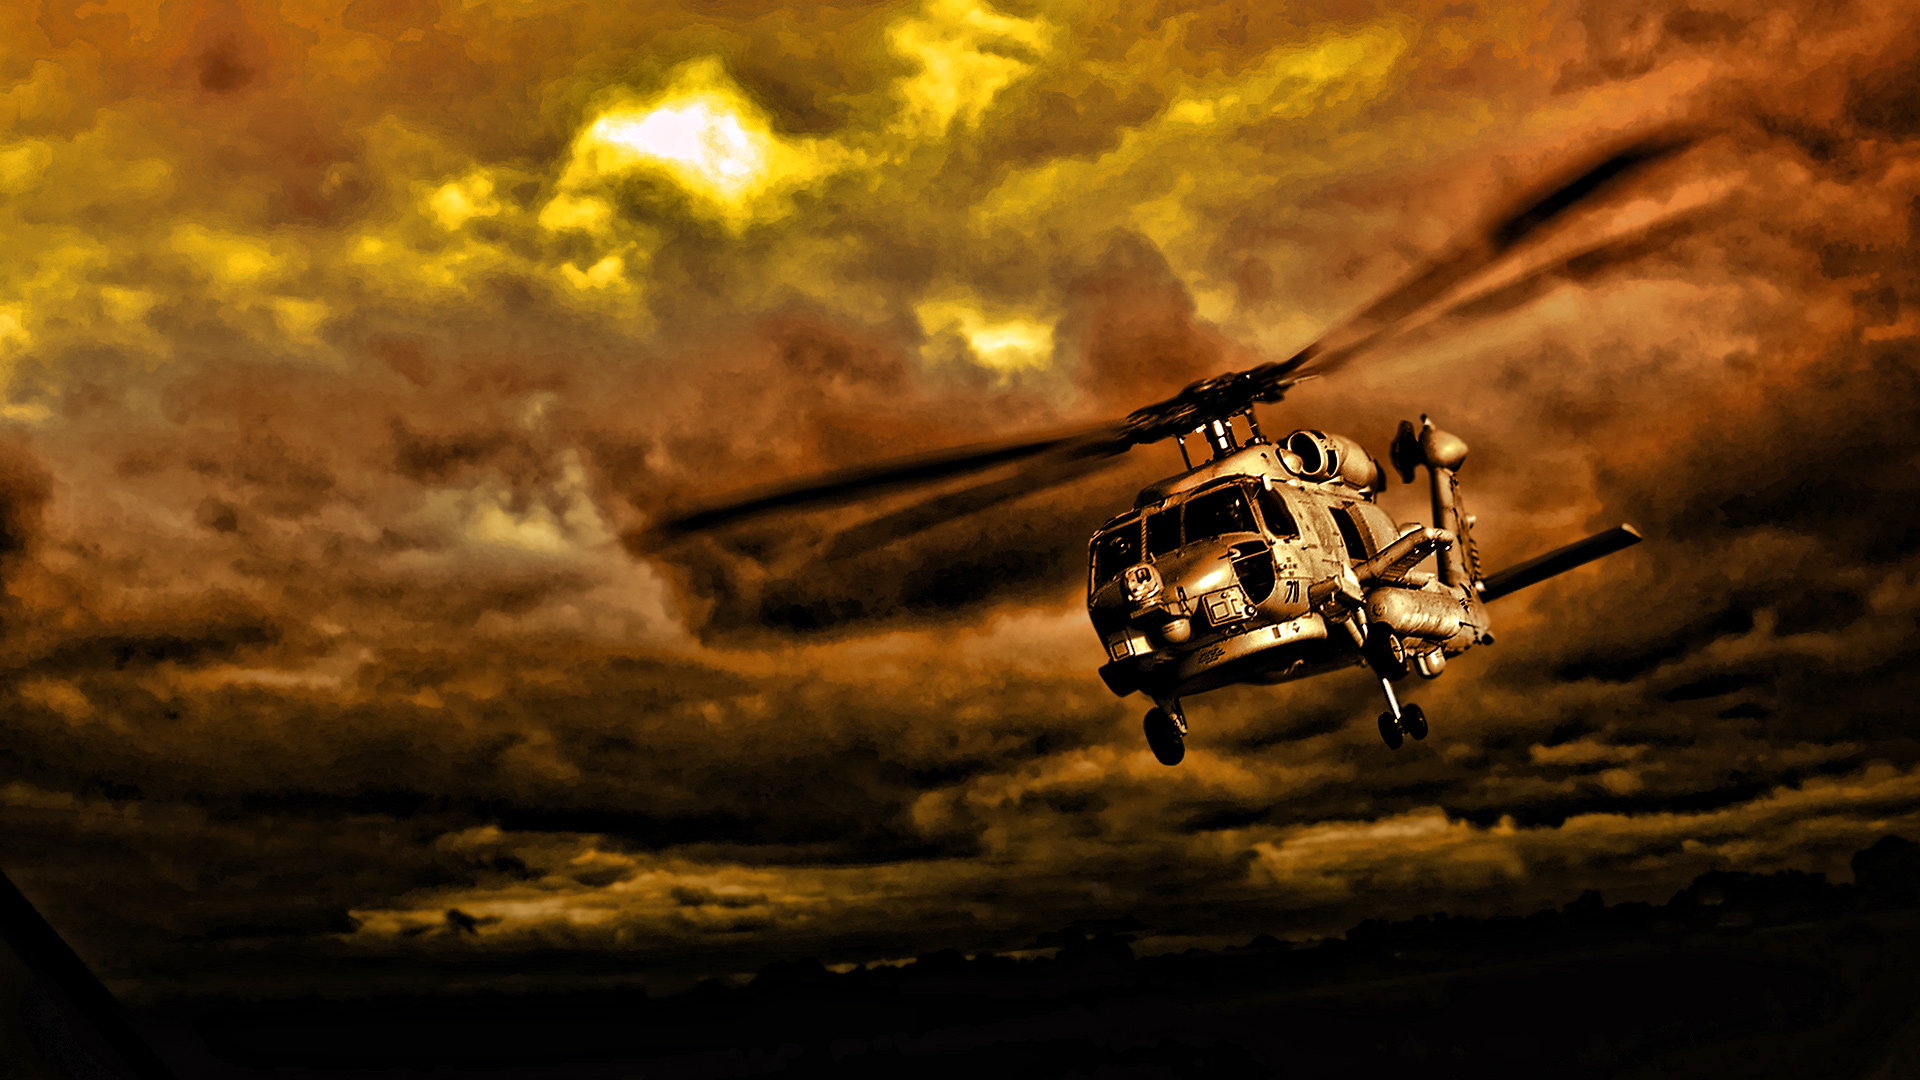 Helicopter Computer Wallpapers Desktop Backgrounds 1920x1080 ID